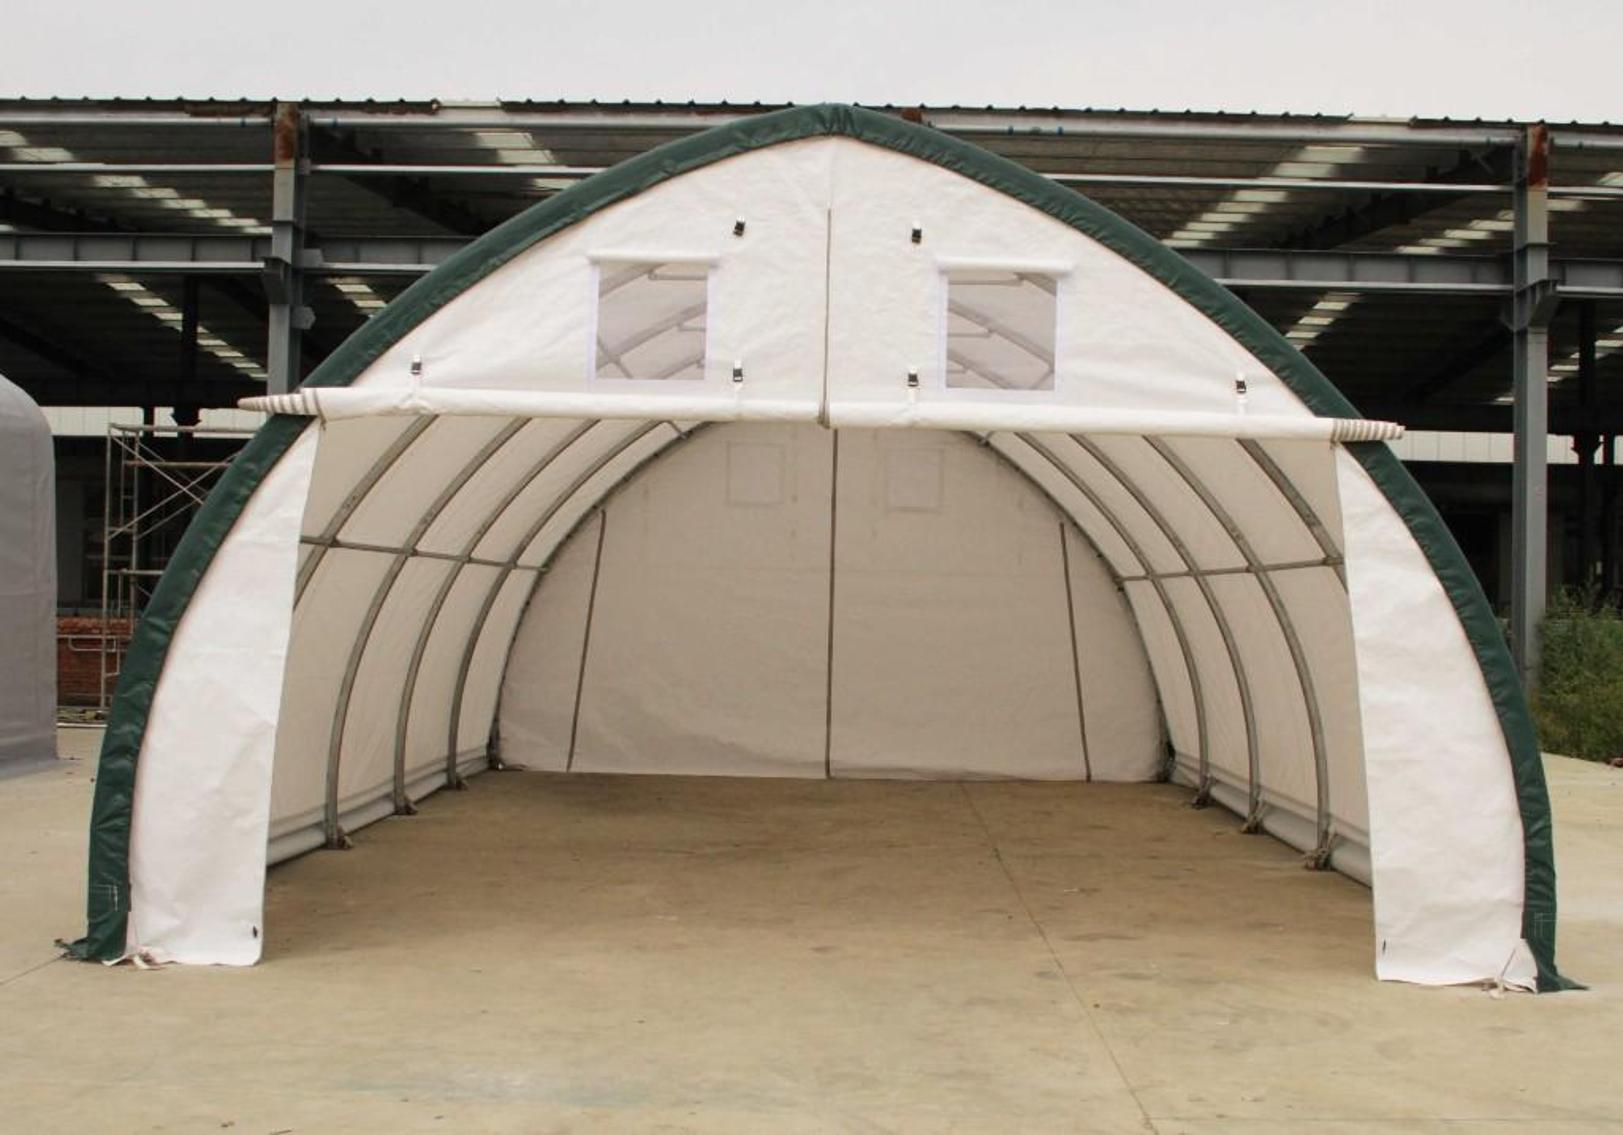 New Tent Buildings, New 2-Post Lift, New Tool Benches, New Tires, Automotive Tools & Bar Signs